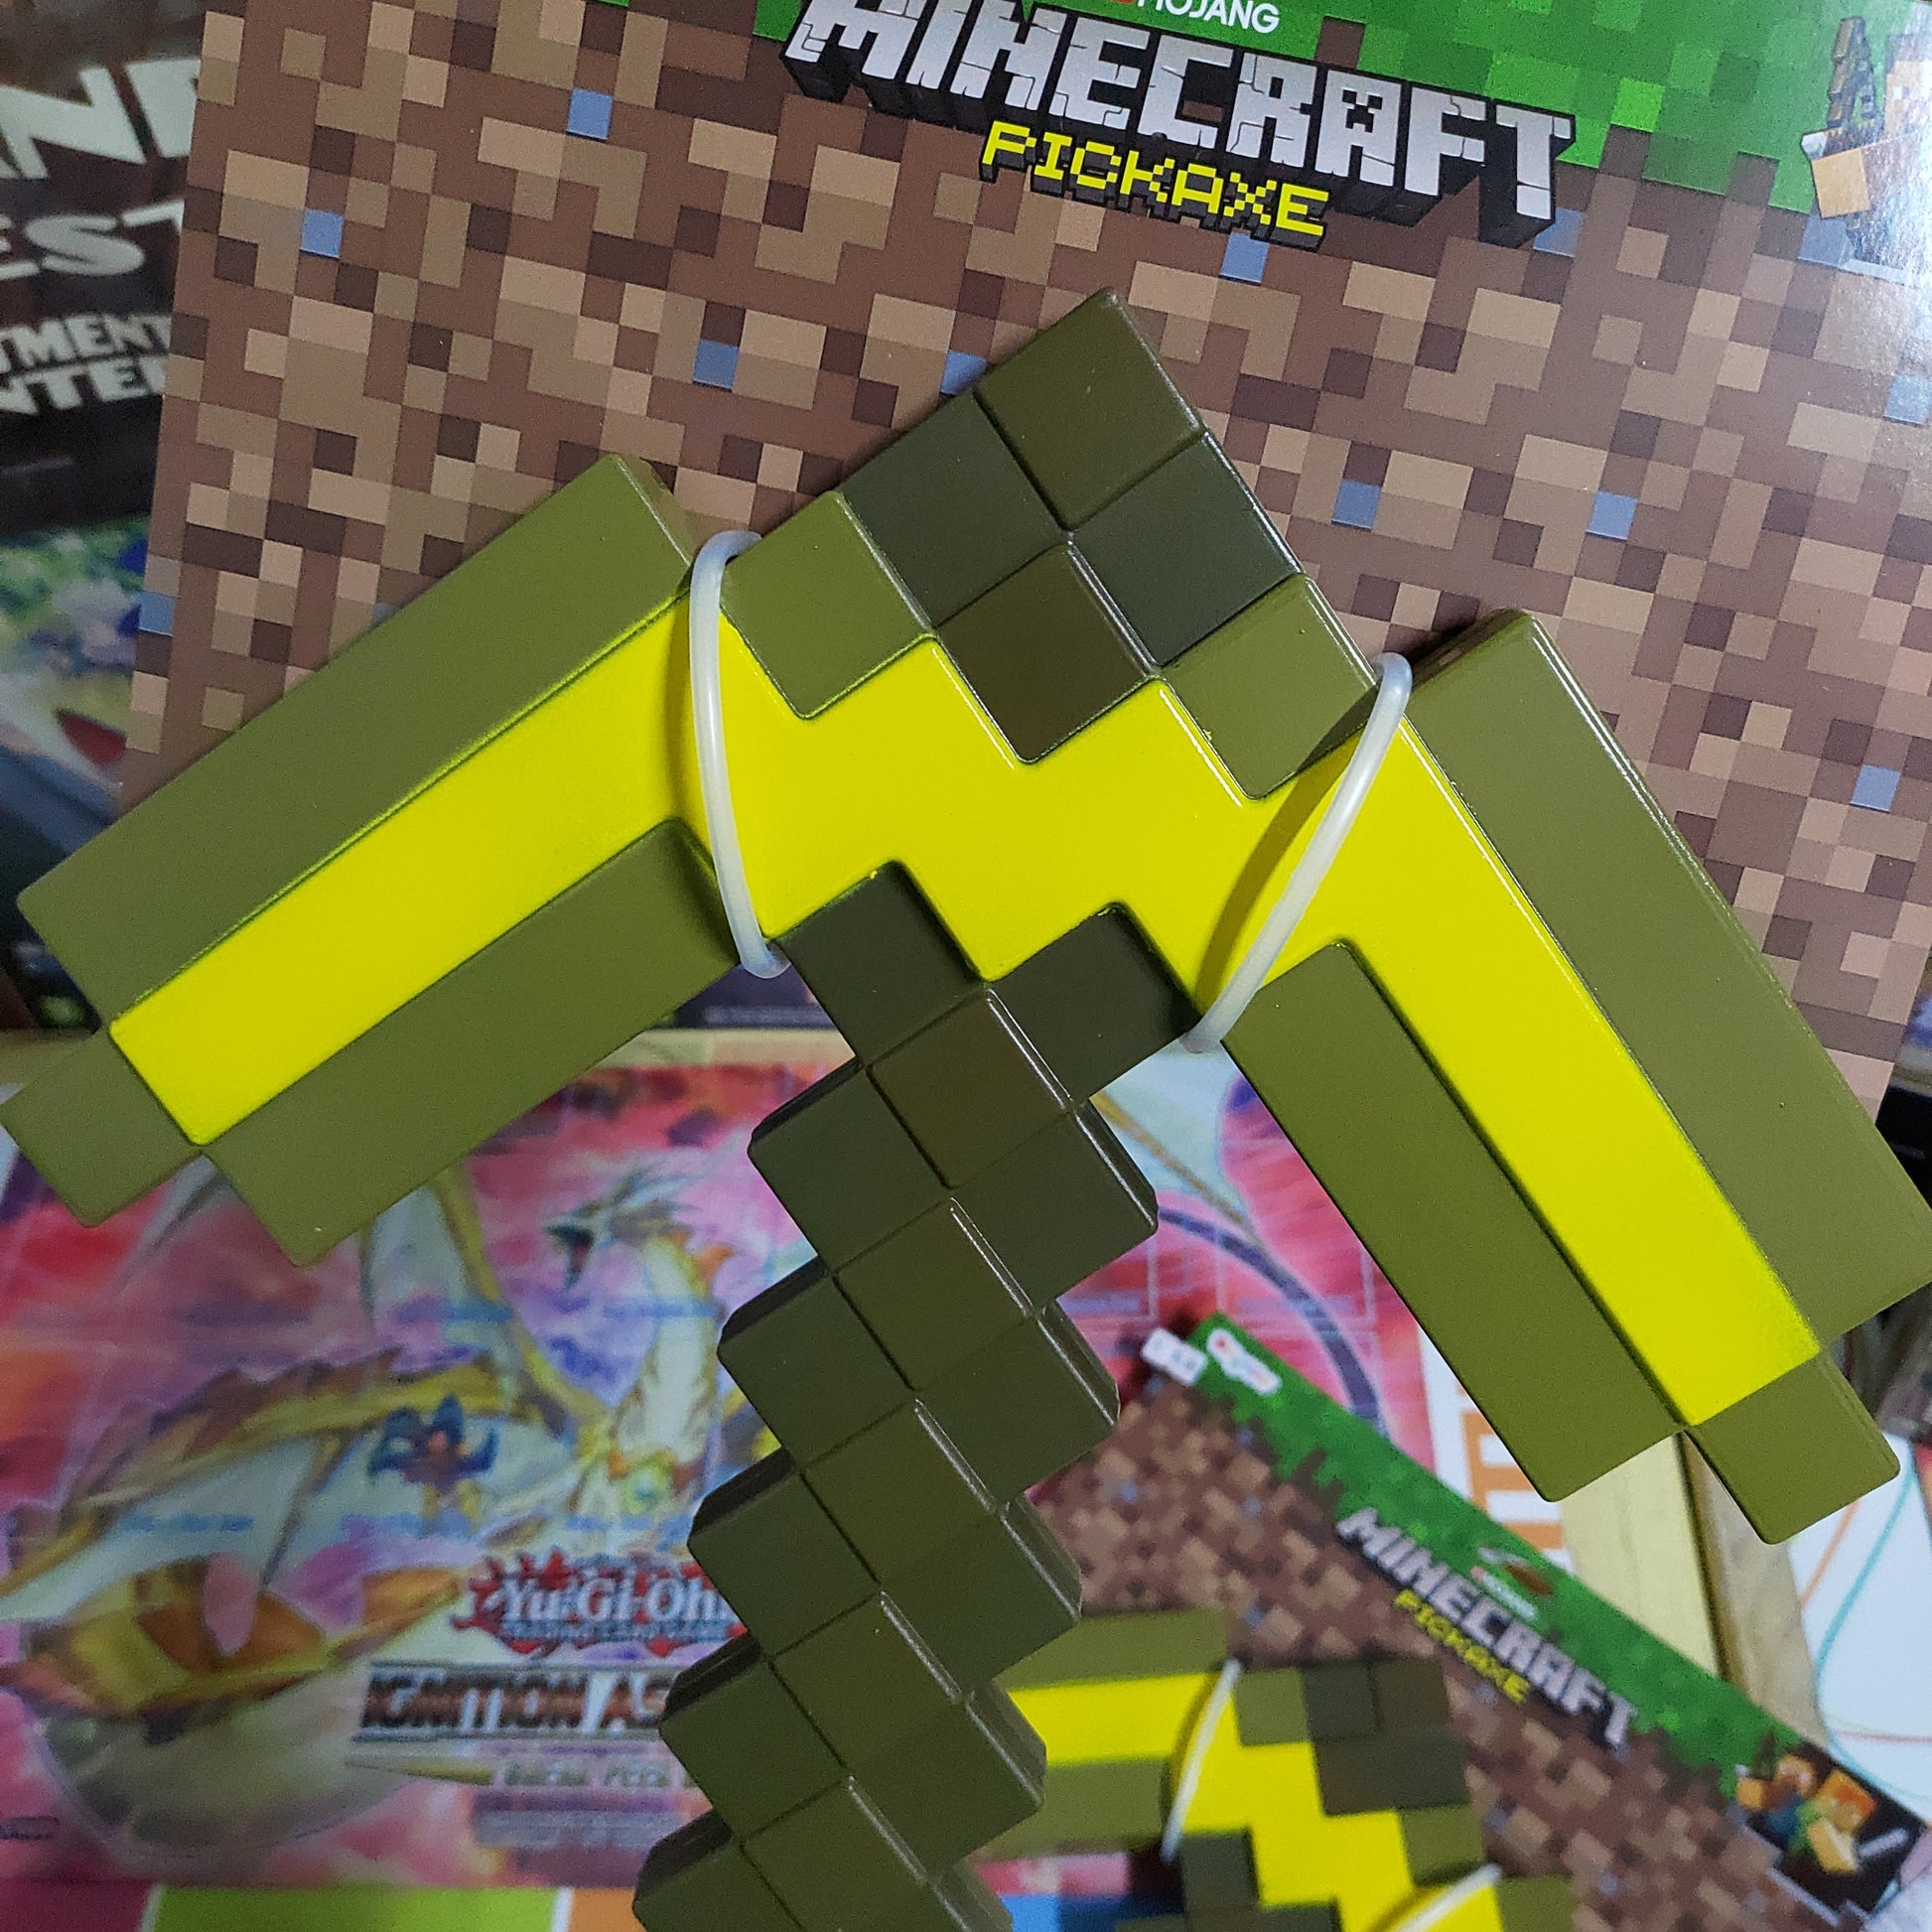 Piccone Minecraft gadget – Ongame Cosenza